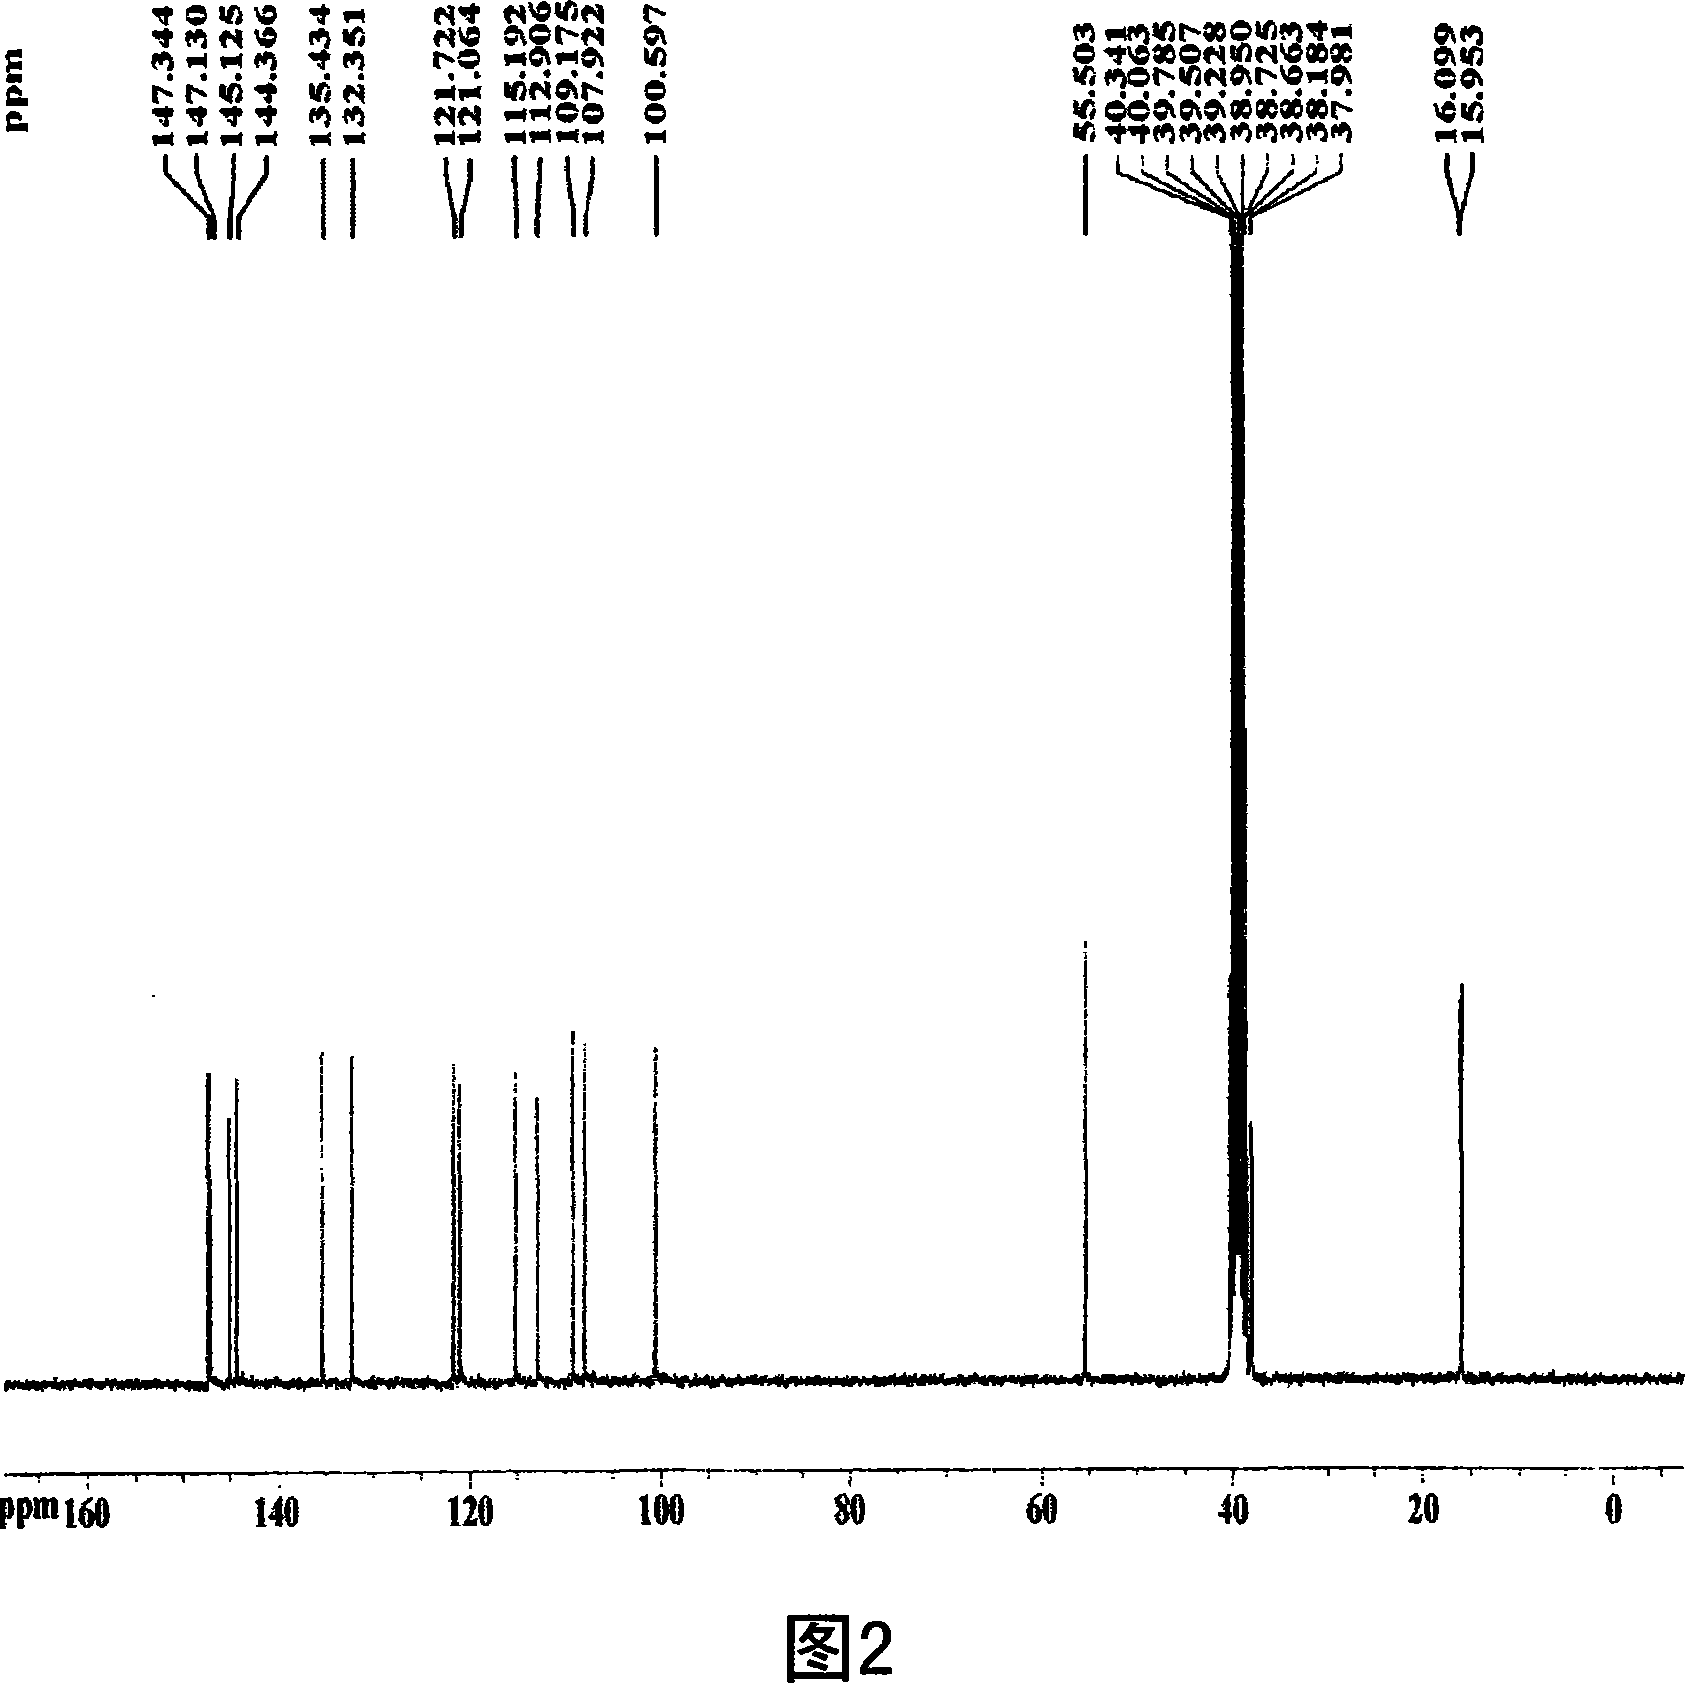 Use of lignan compounds for treating or preventing inflammatory disease